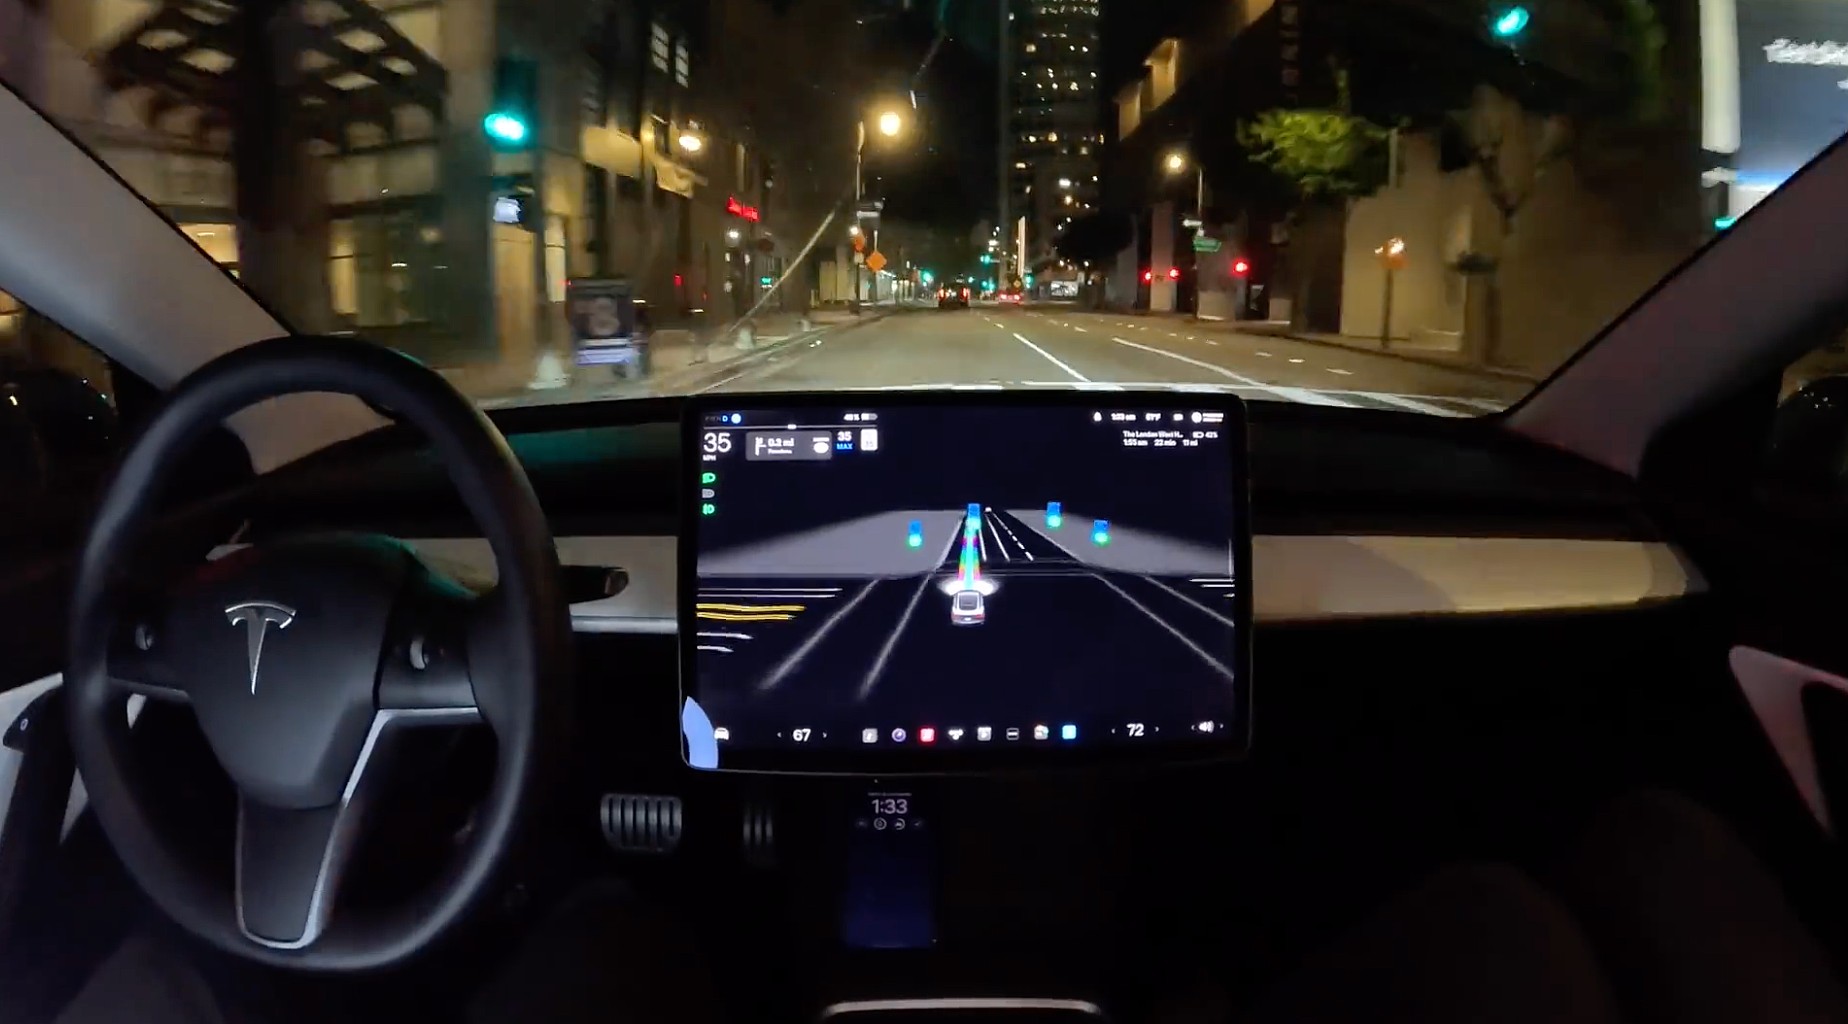 Tesla owner’s manuals outside North America hint at FSD beta rollout